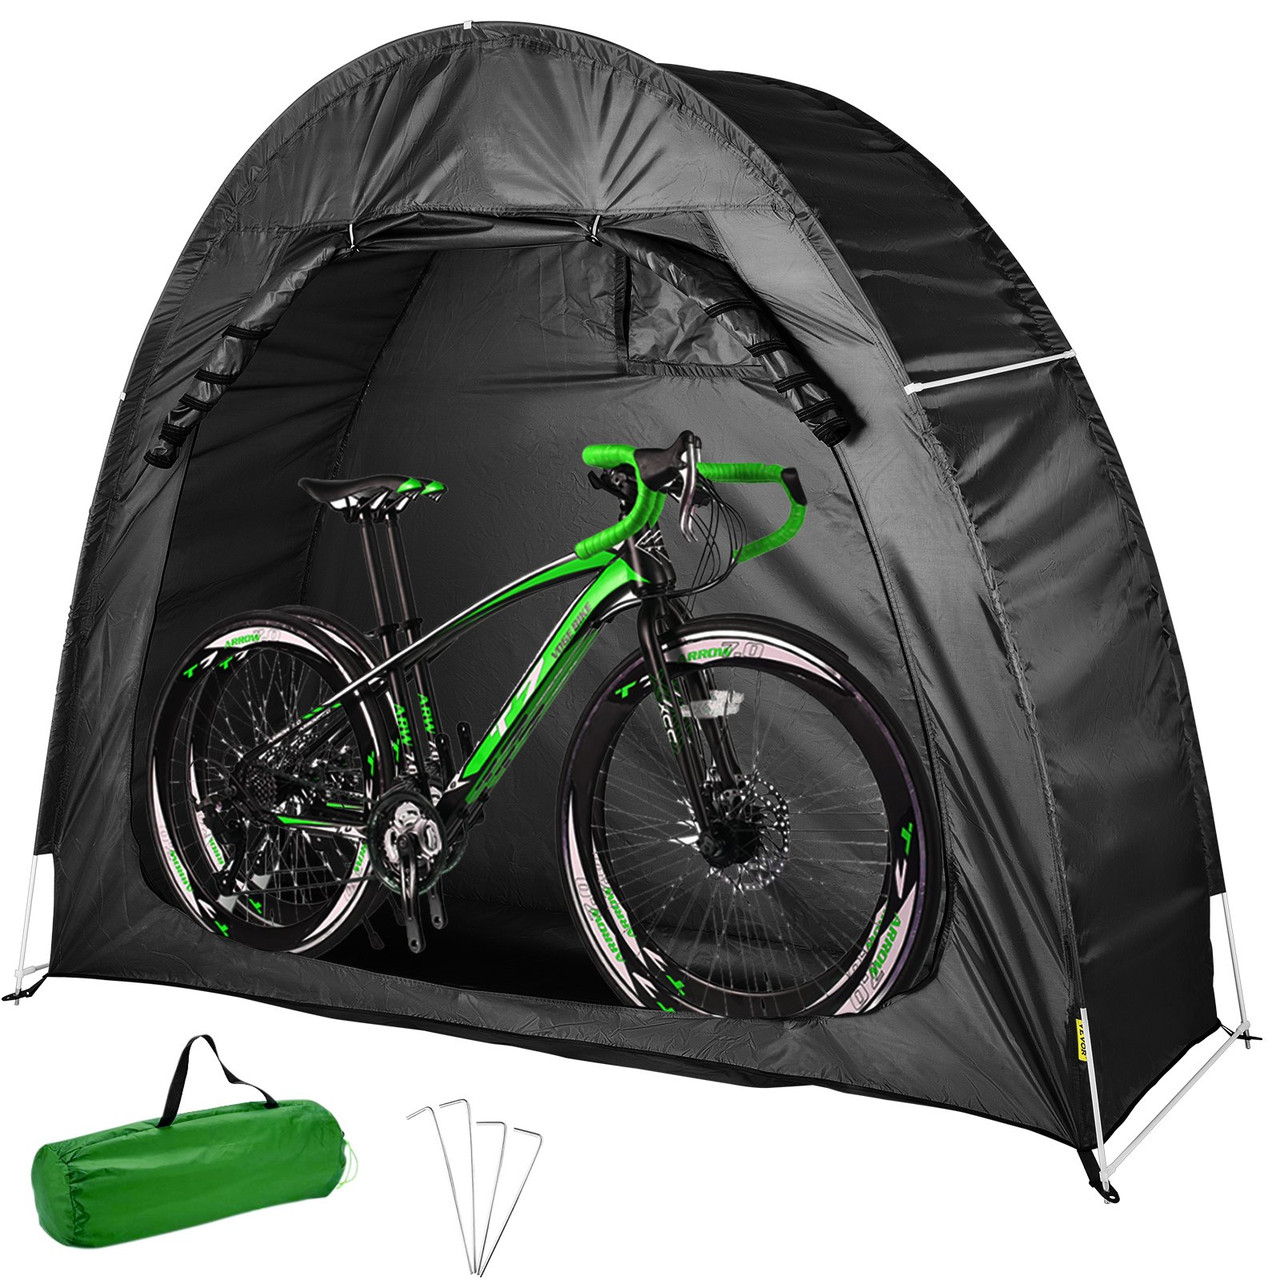 Bike Cover Storage Tent, 420D Oxford Portable for 2 Bikes, Outdoor Waterproof Anti-Dust Bicycle Storage Shed, Heavy Duty for Bikes, Lawn Mower, and Garden Tools, w/ Carry Bag and Pegs, Black